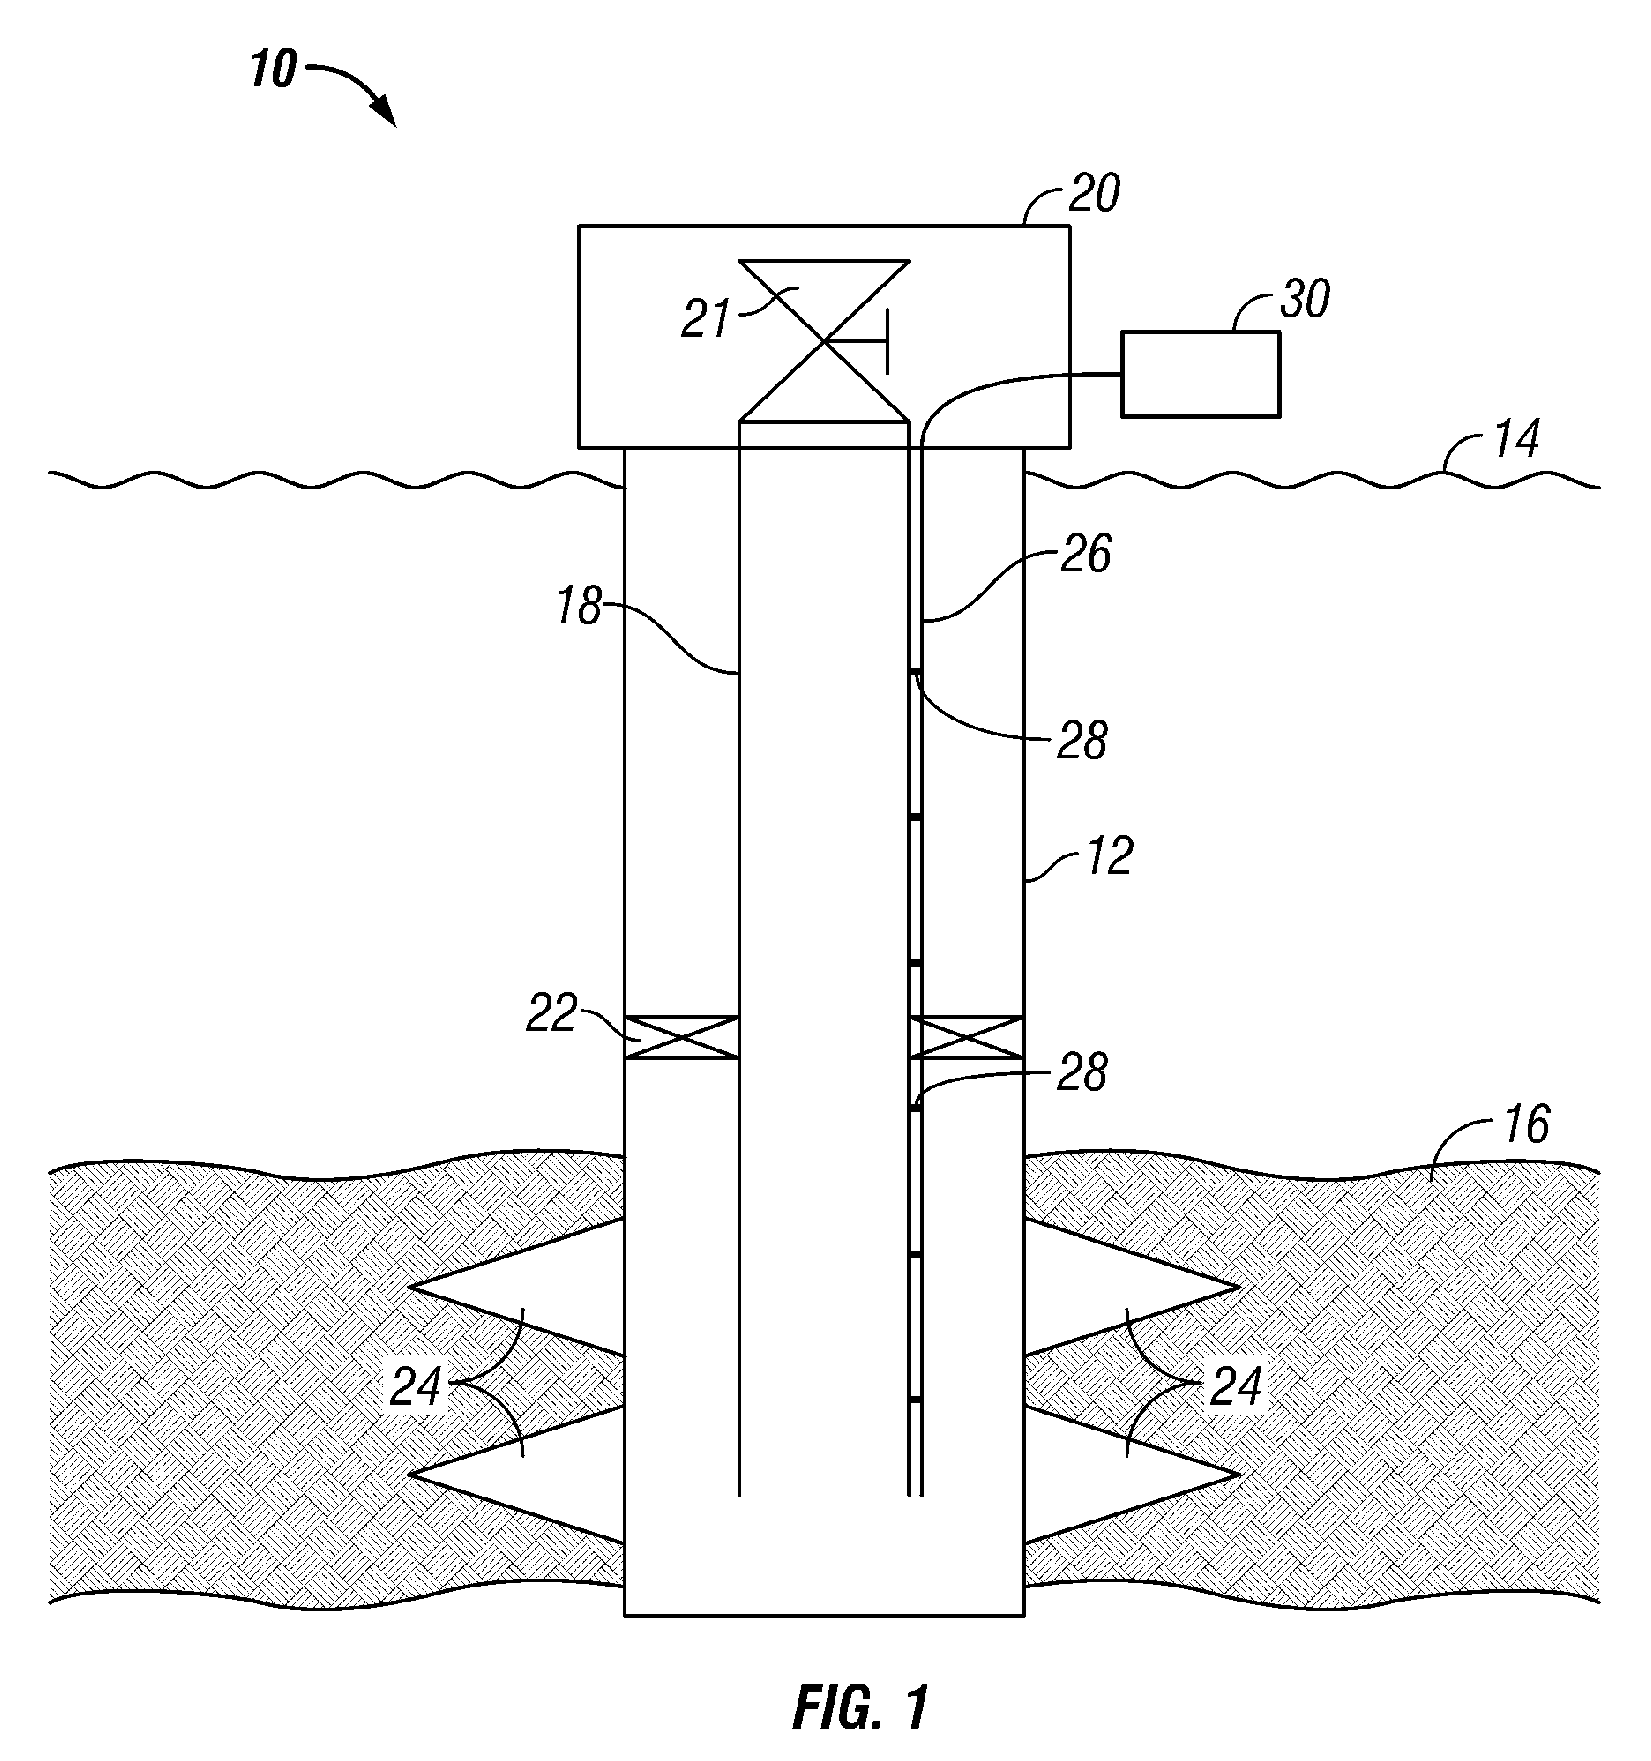 Method and Apparatus for Measuring Fluid Properties